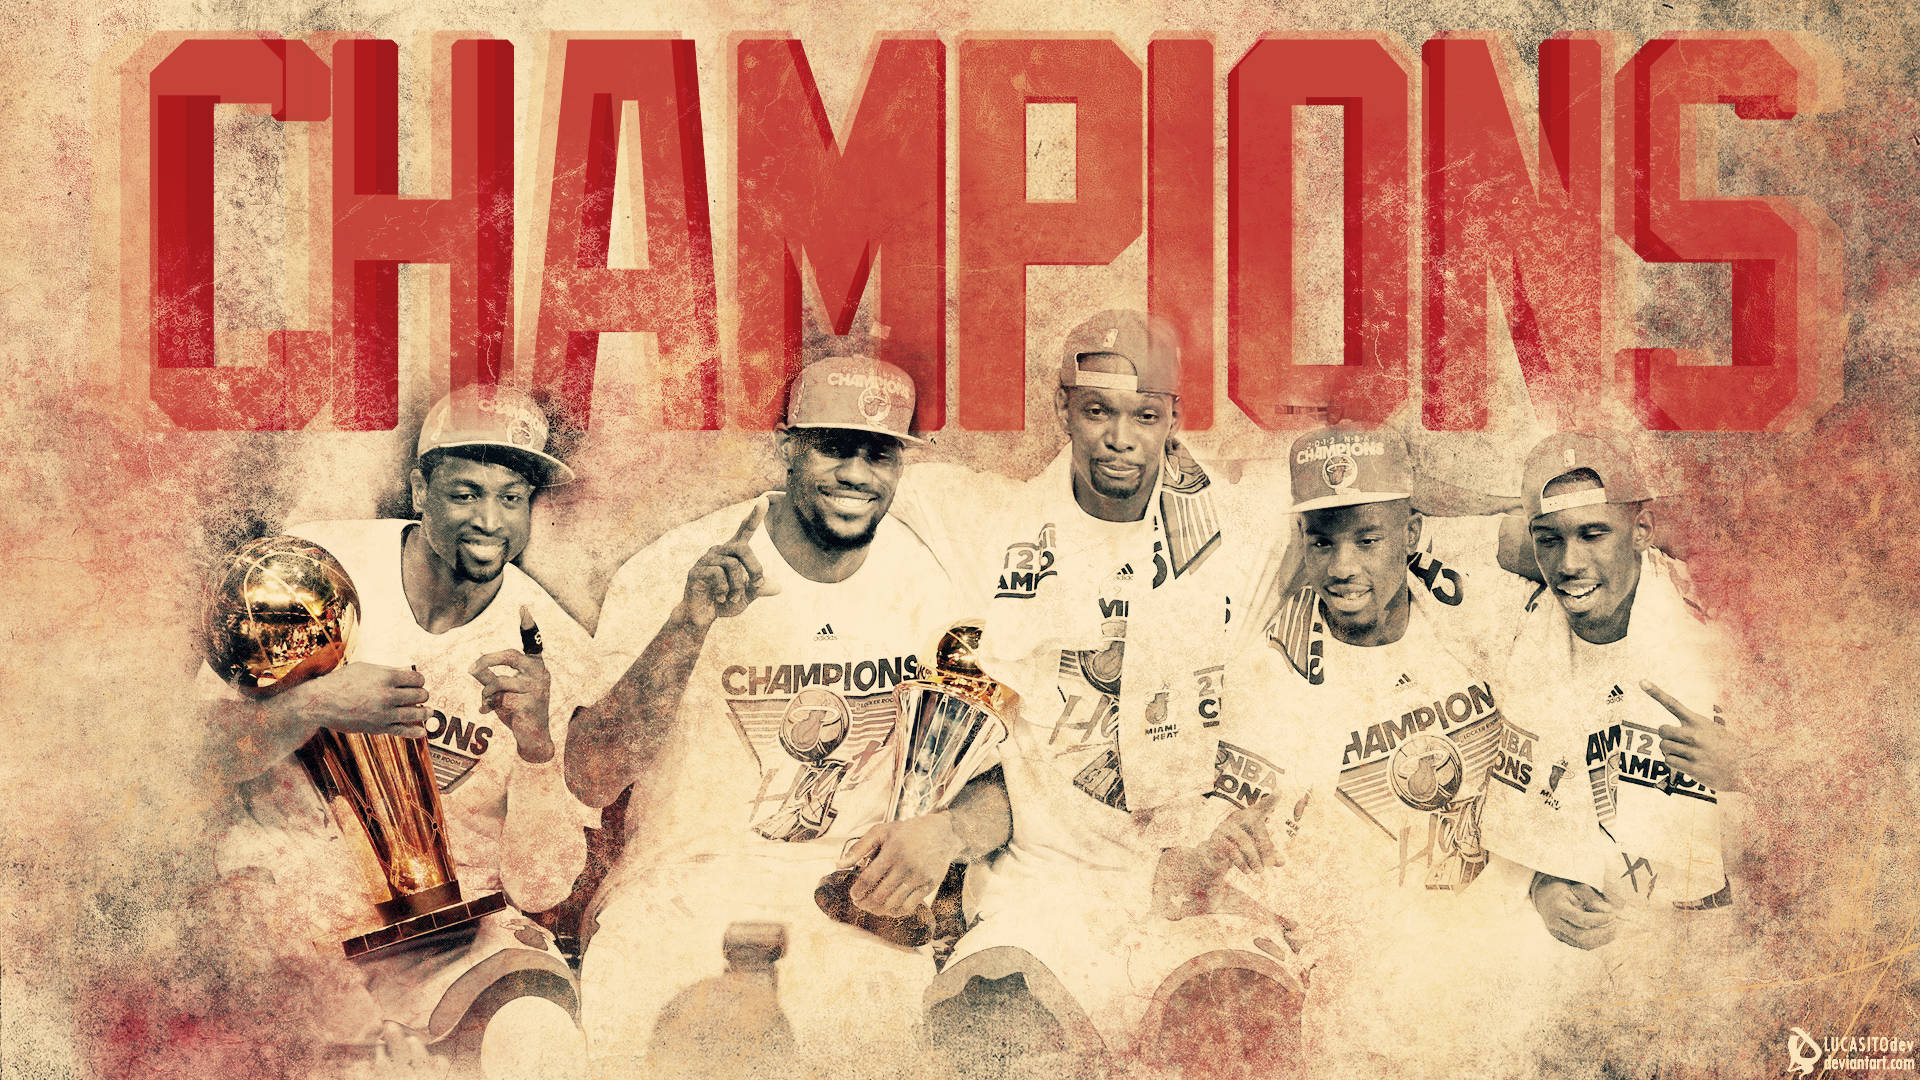 Cool Basketball Champions Poster Background